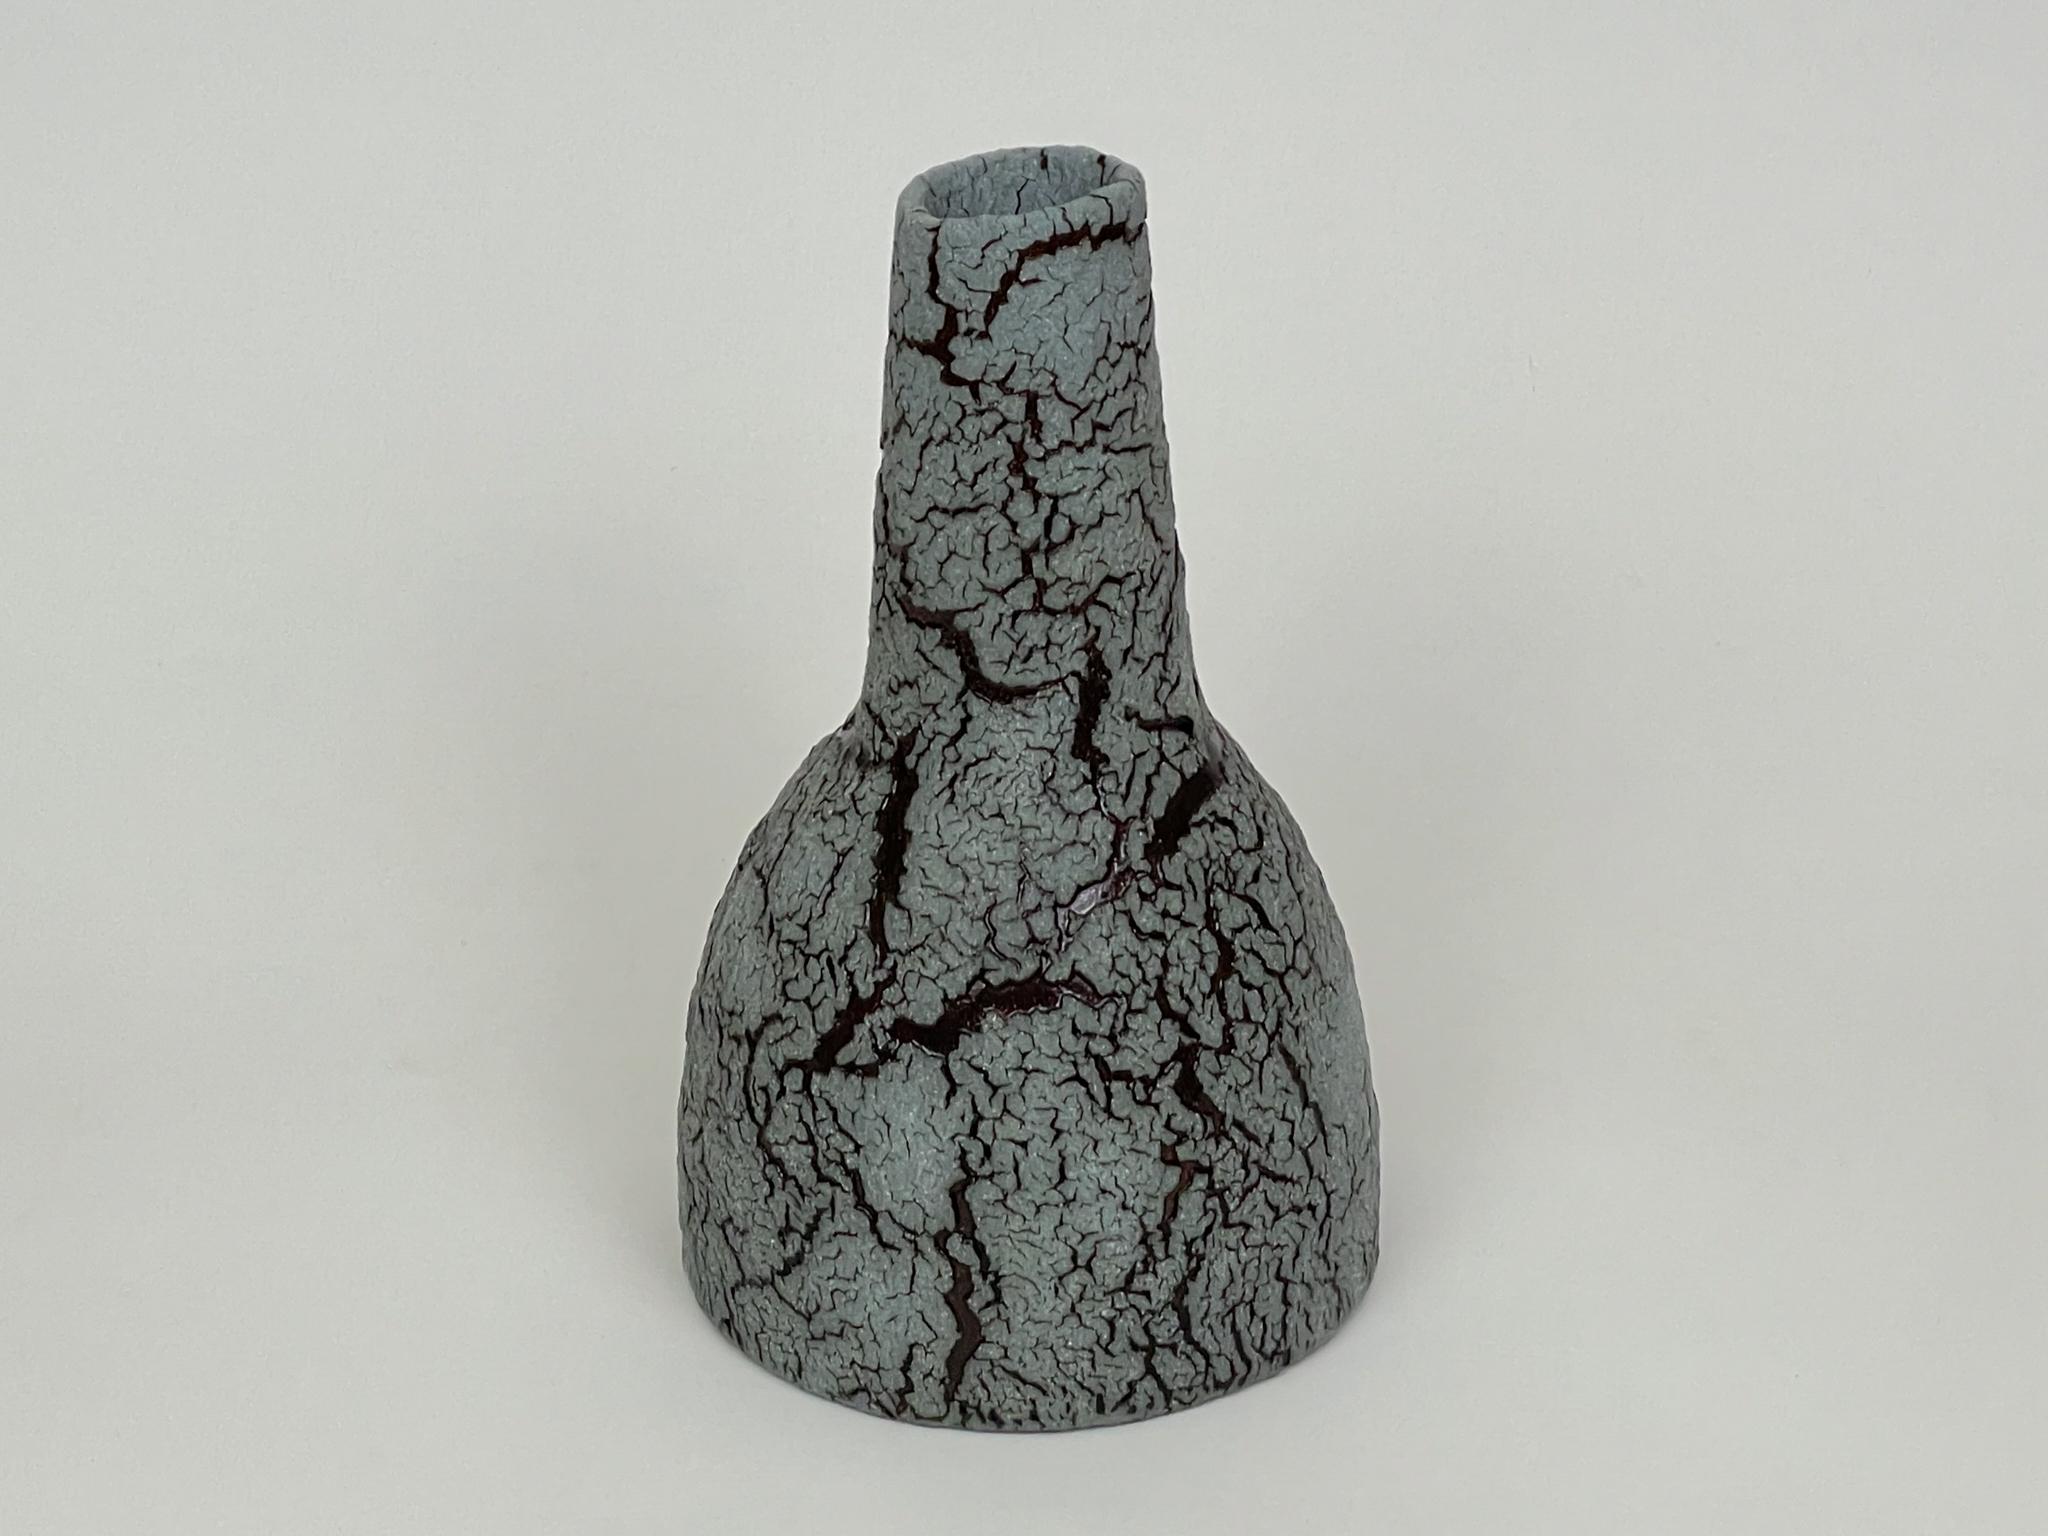 Ceramic bottle by William Edwards
Hand built earthenware vessel, fired multiple times to achieve a textured surface of random abstraction, matte sage gray-blue with dark brown gloss glaze breaking through.

William received his BFA in sculpture